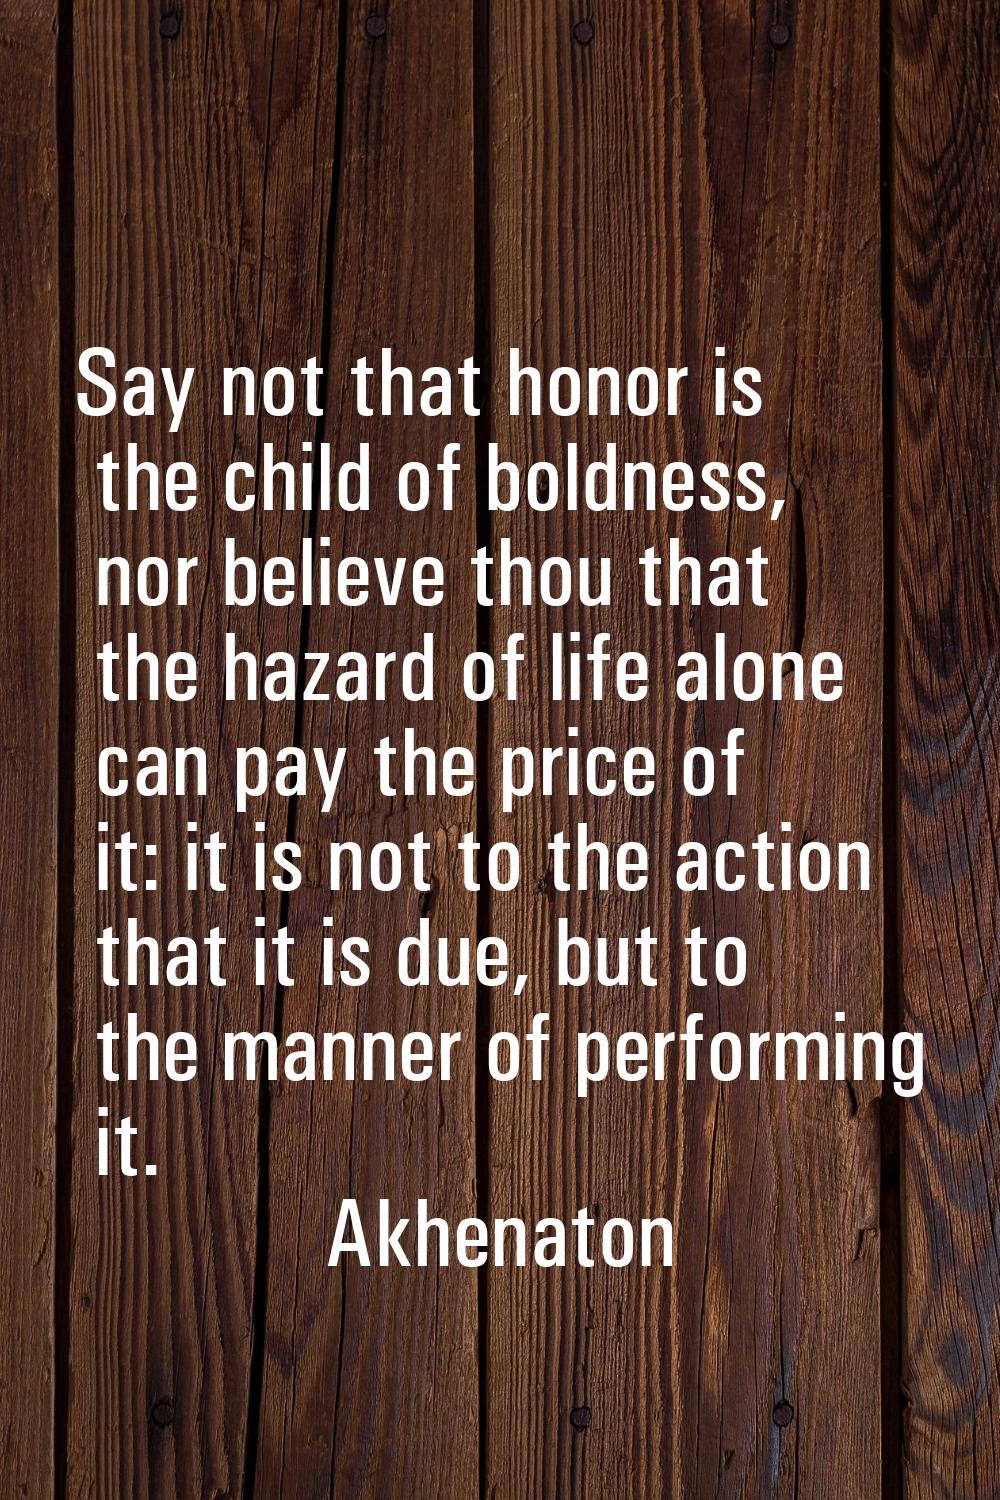 Say not that honor is the child of boldness, nor believe thou that the hazard of life alone can pay